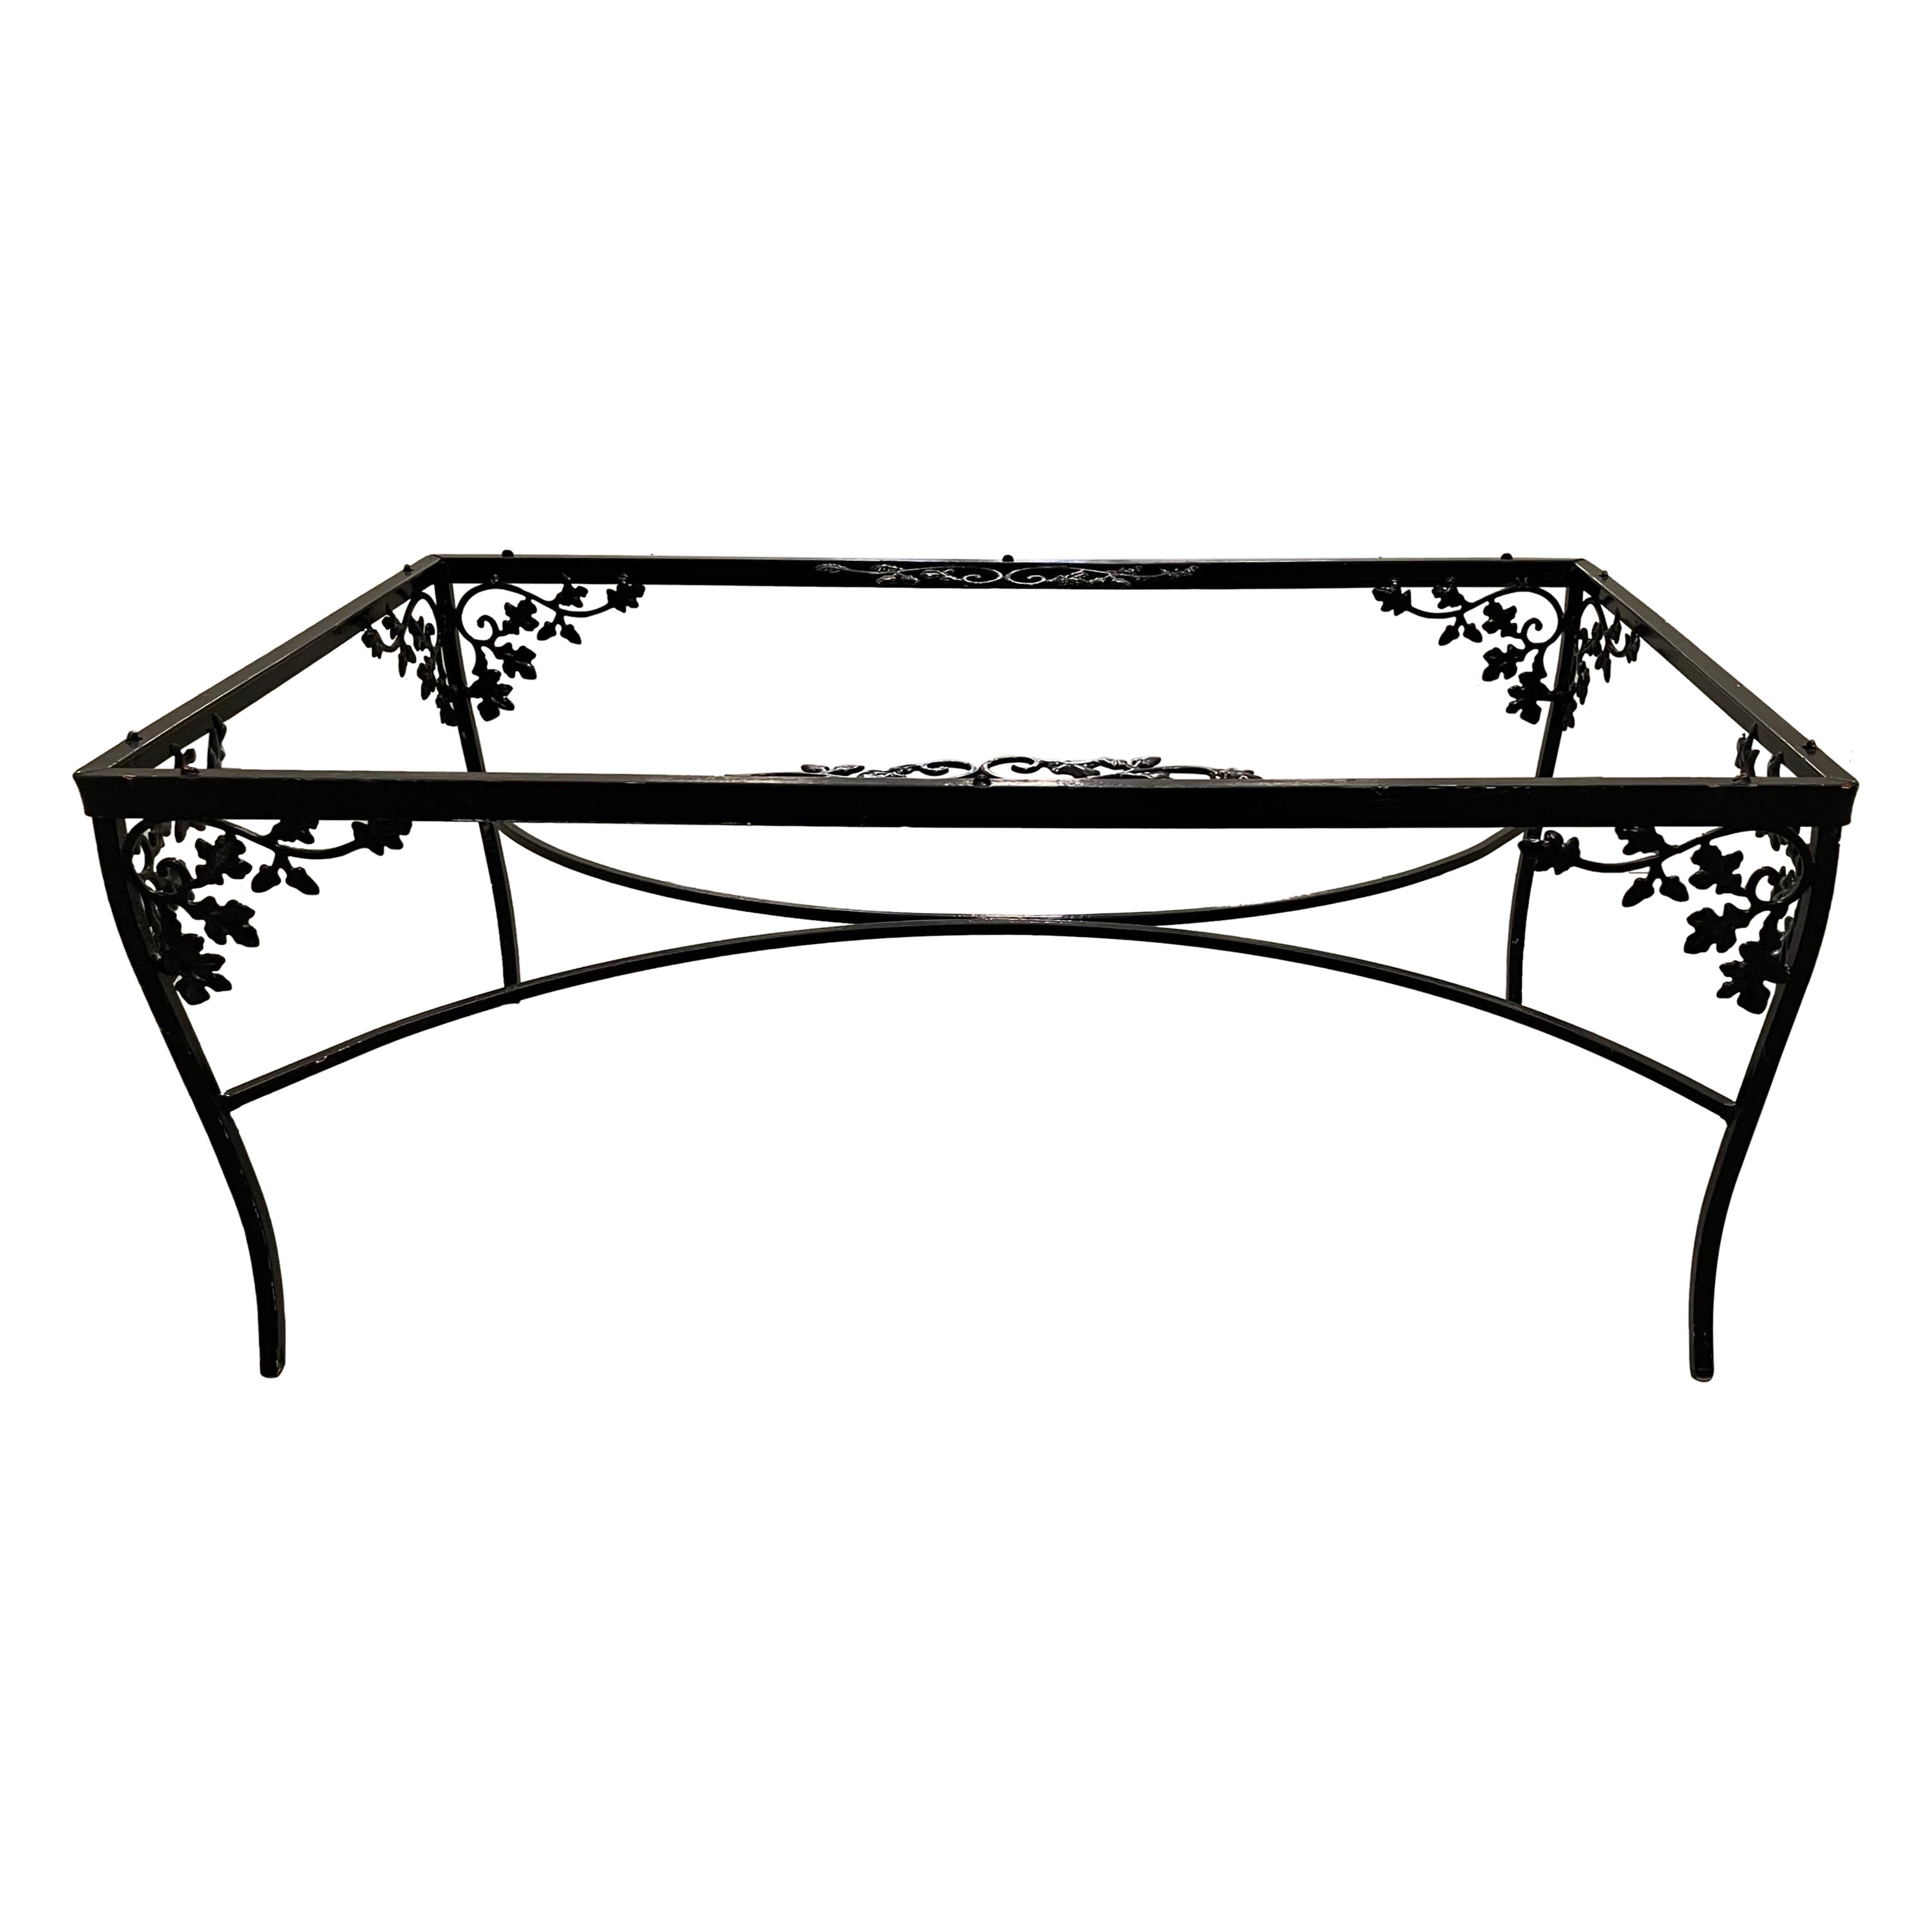 Woodard Orleans Wrought Iron Coffee Table